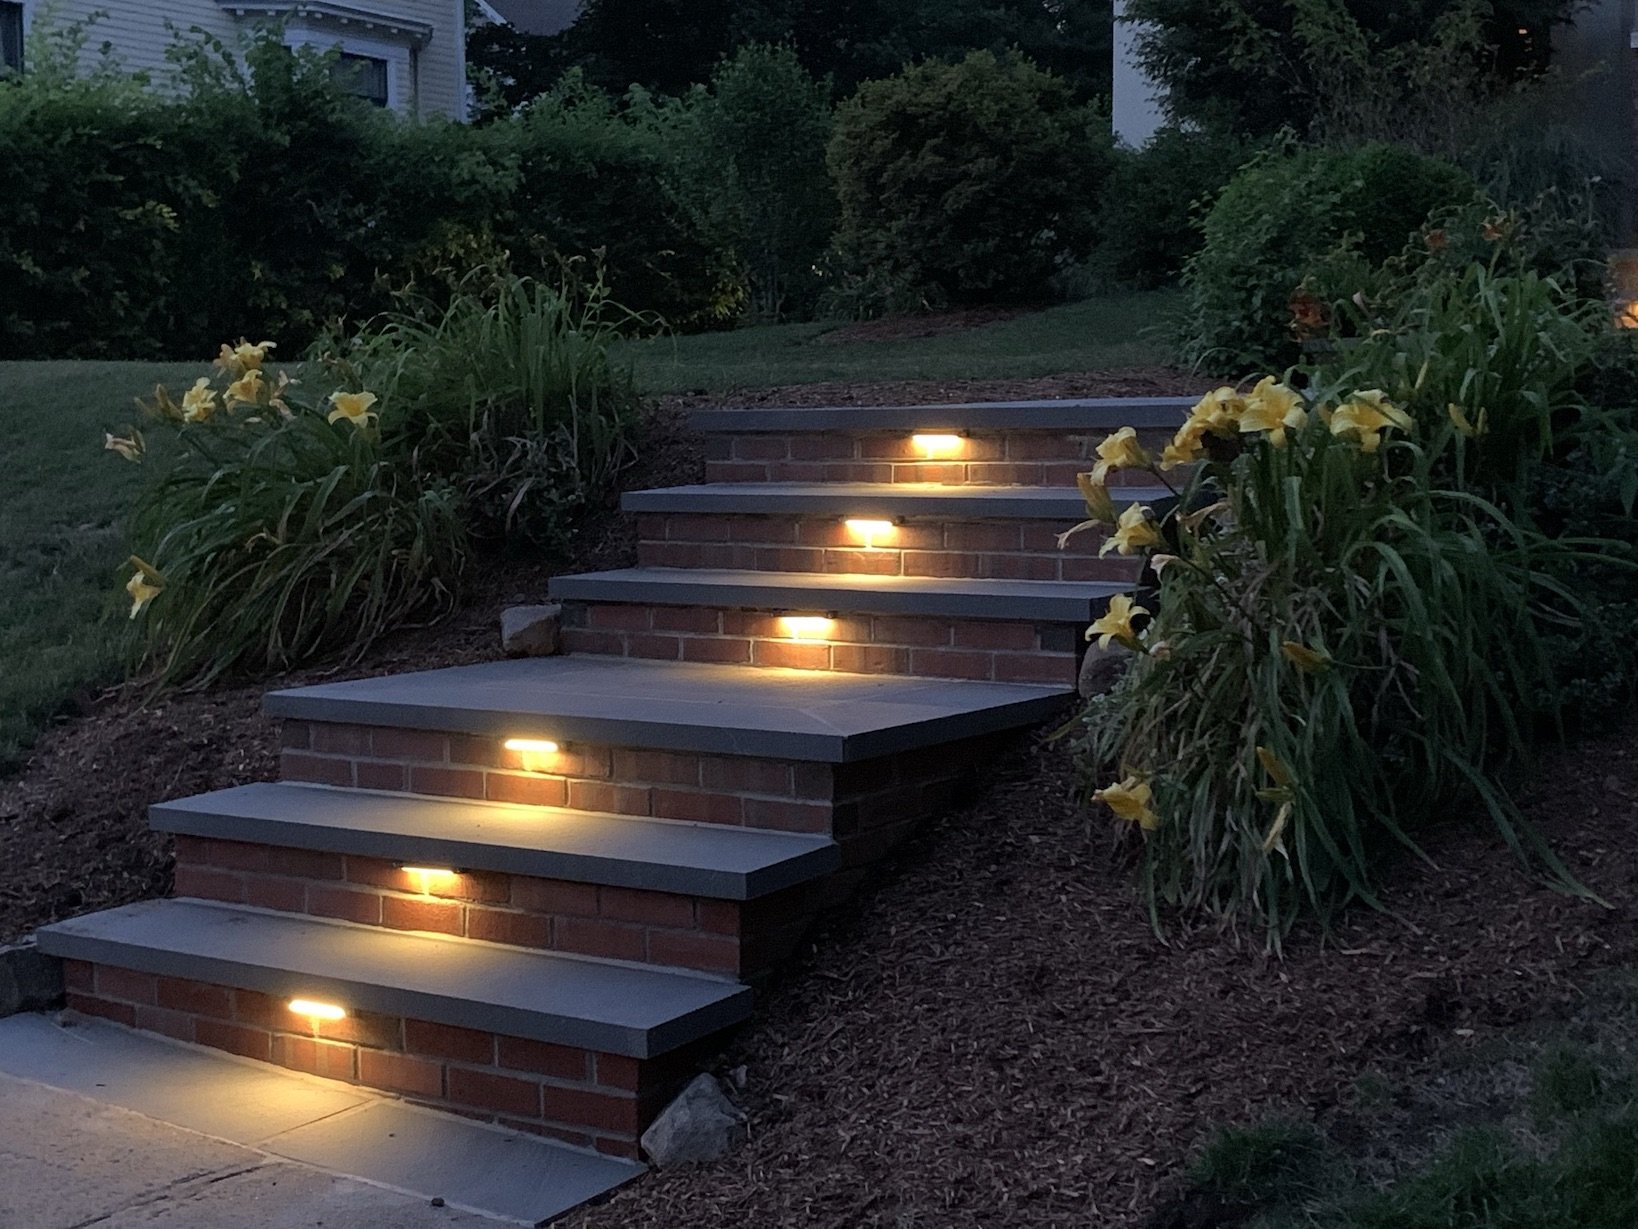 Cap lights on brick steps to highlight front entrance walkway to house at night.JPEG